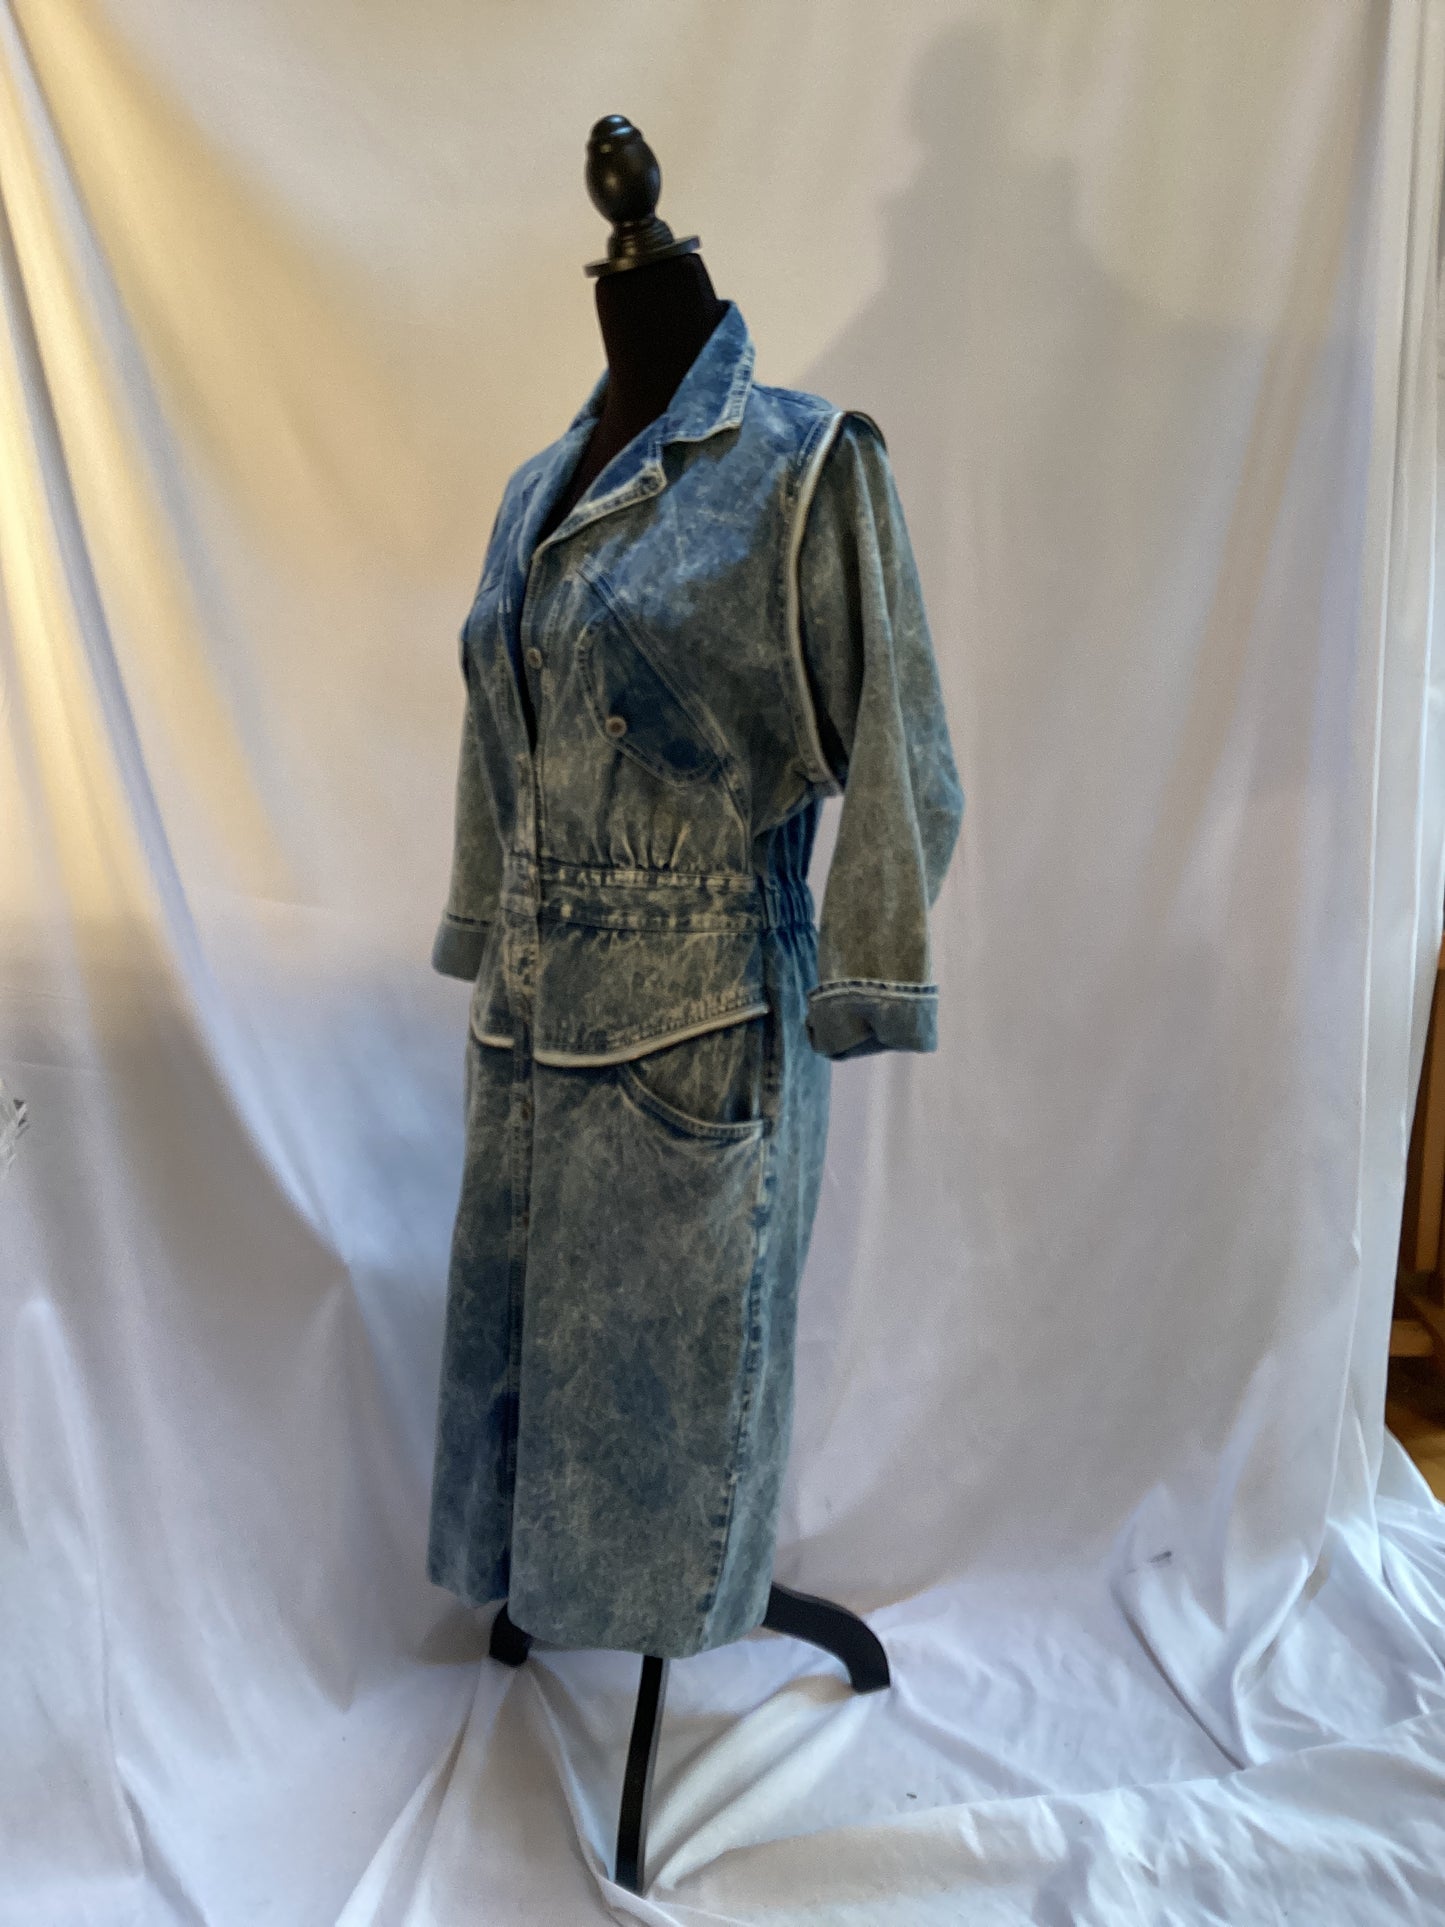 Front Button  Acid washed Denim Dress by Coloursport, size small